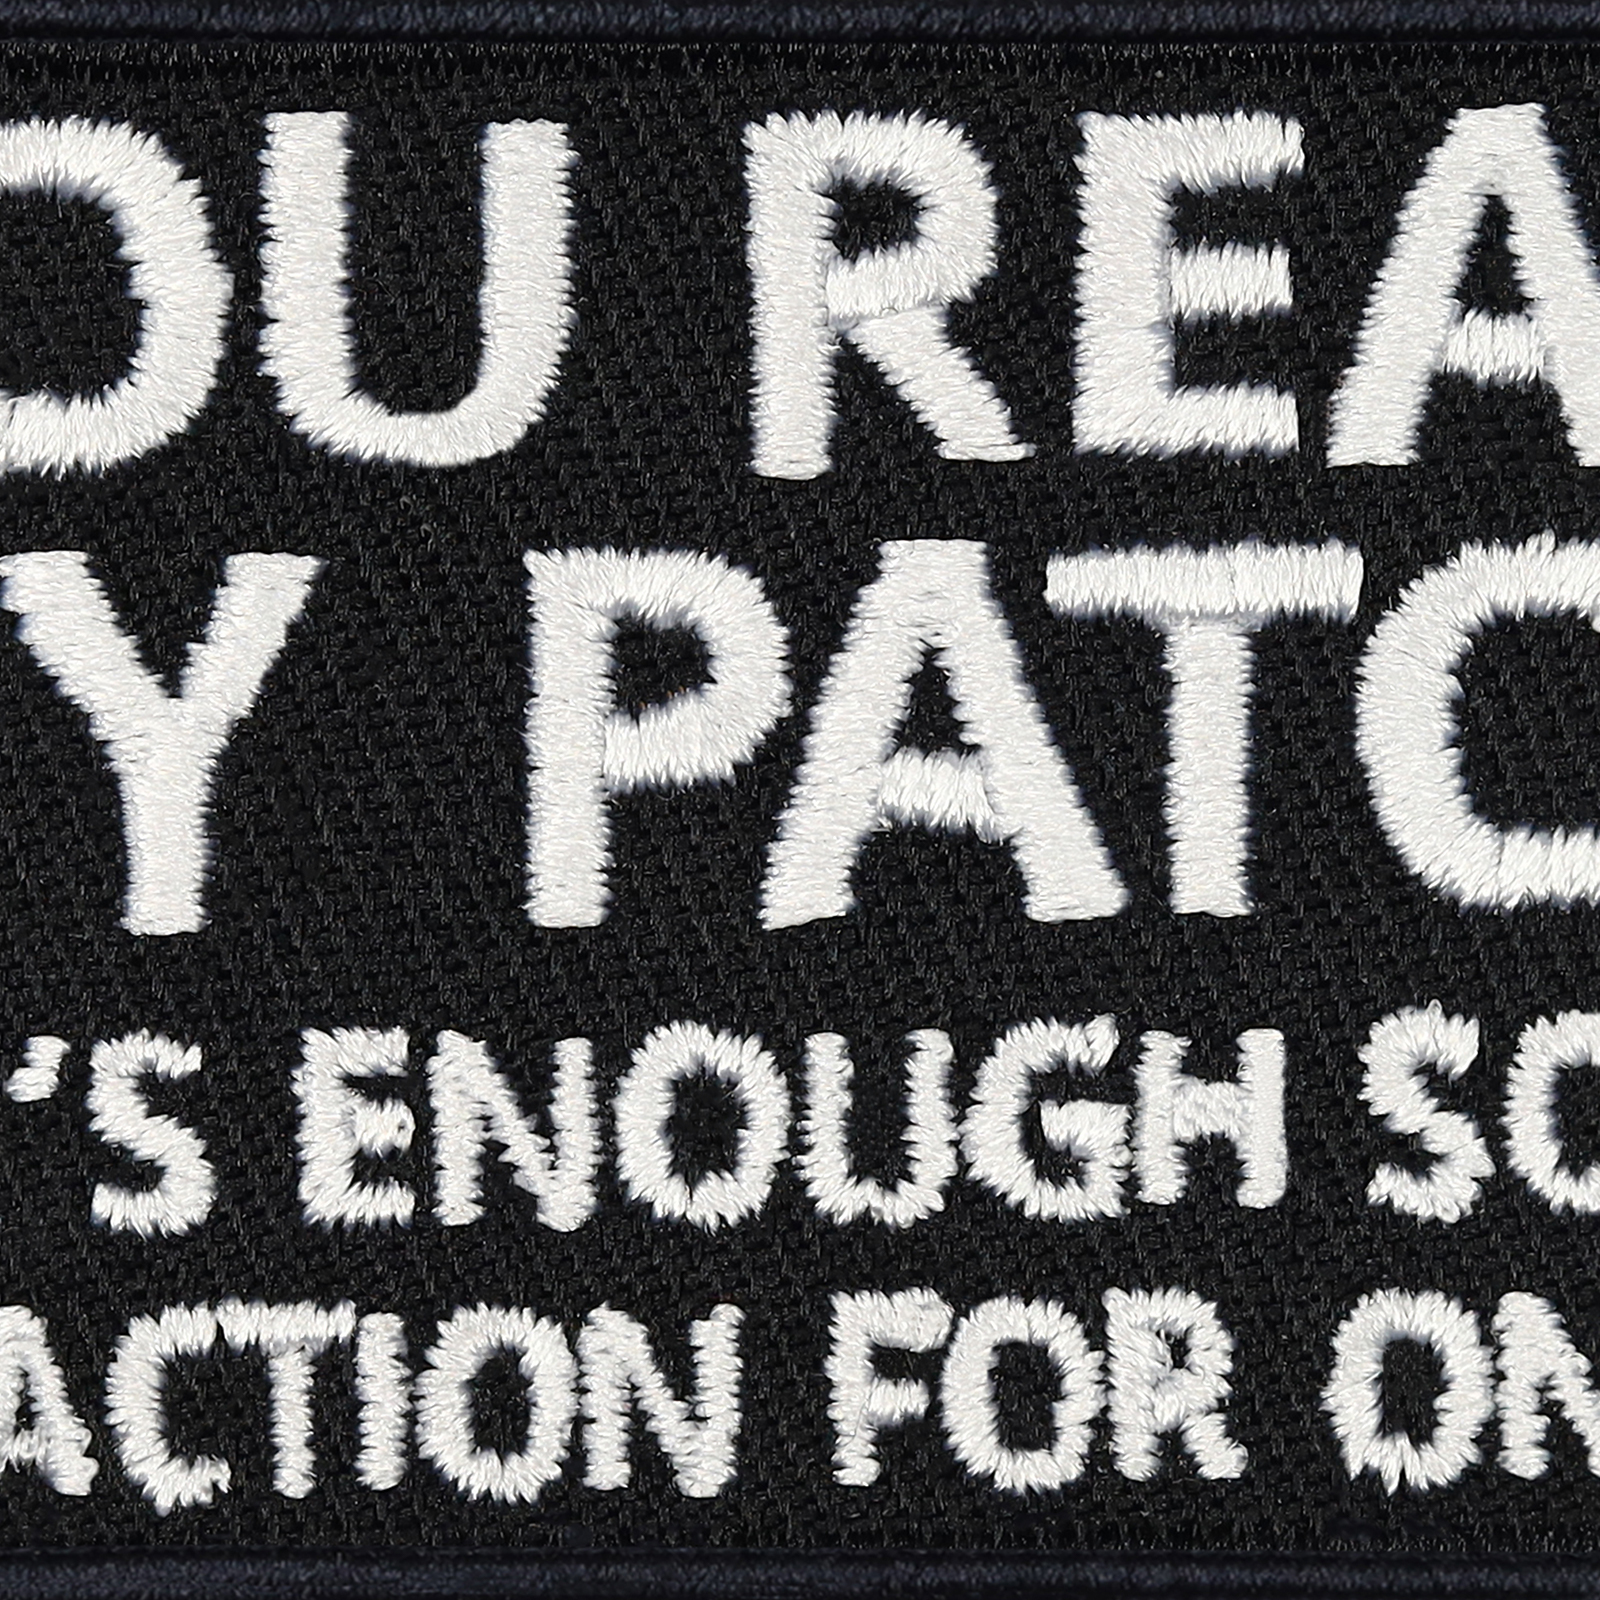 You read my patch - That's enough social interaction for one day. - Patch